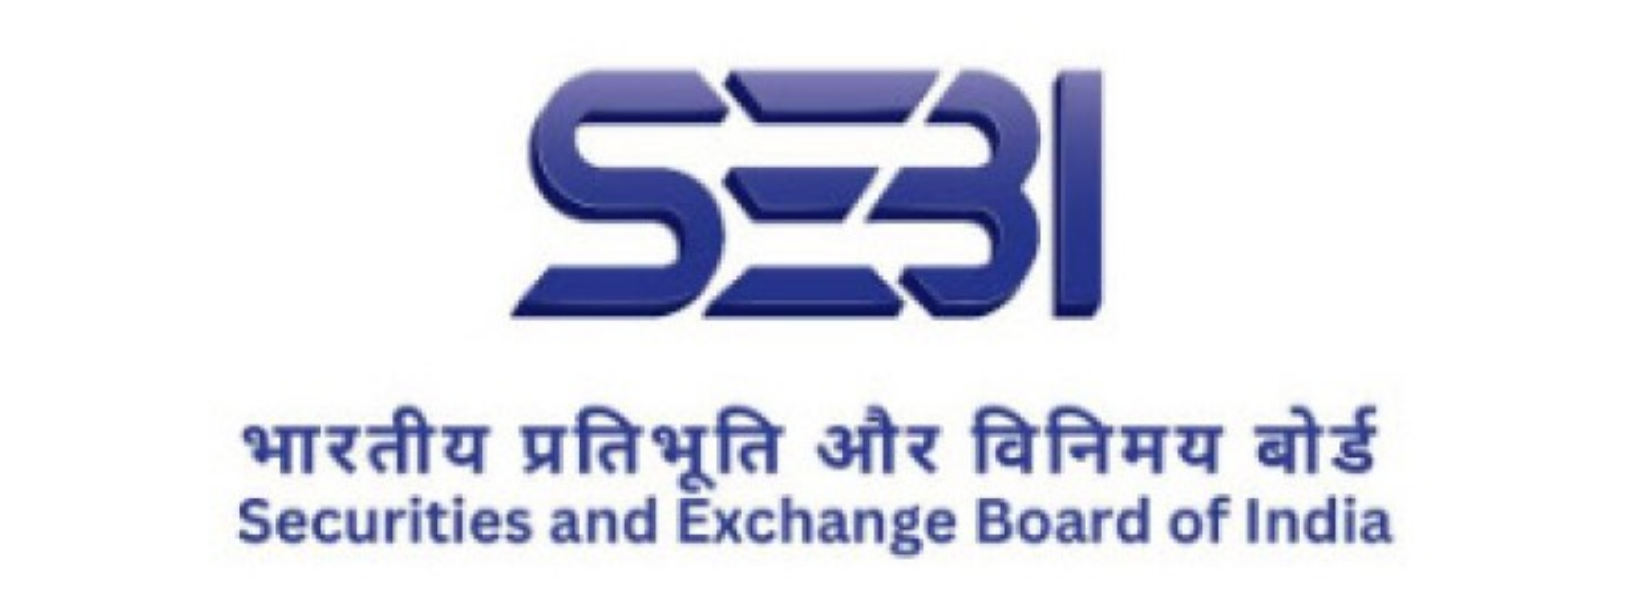  Logo of Securities and Exchange Board of India